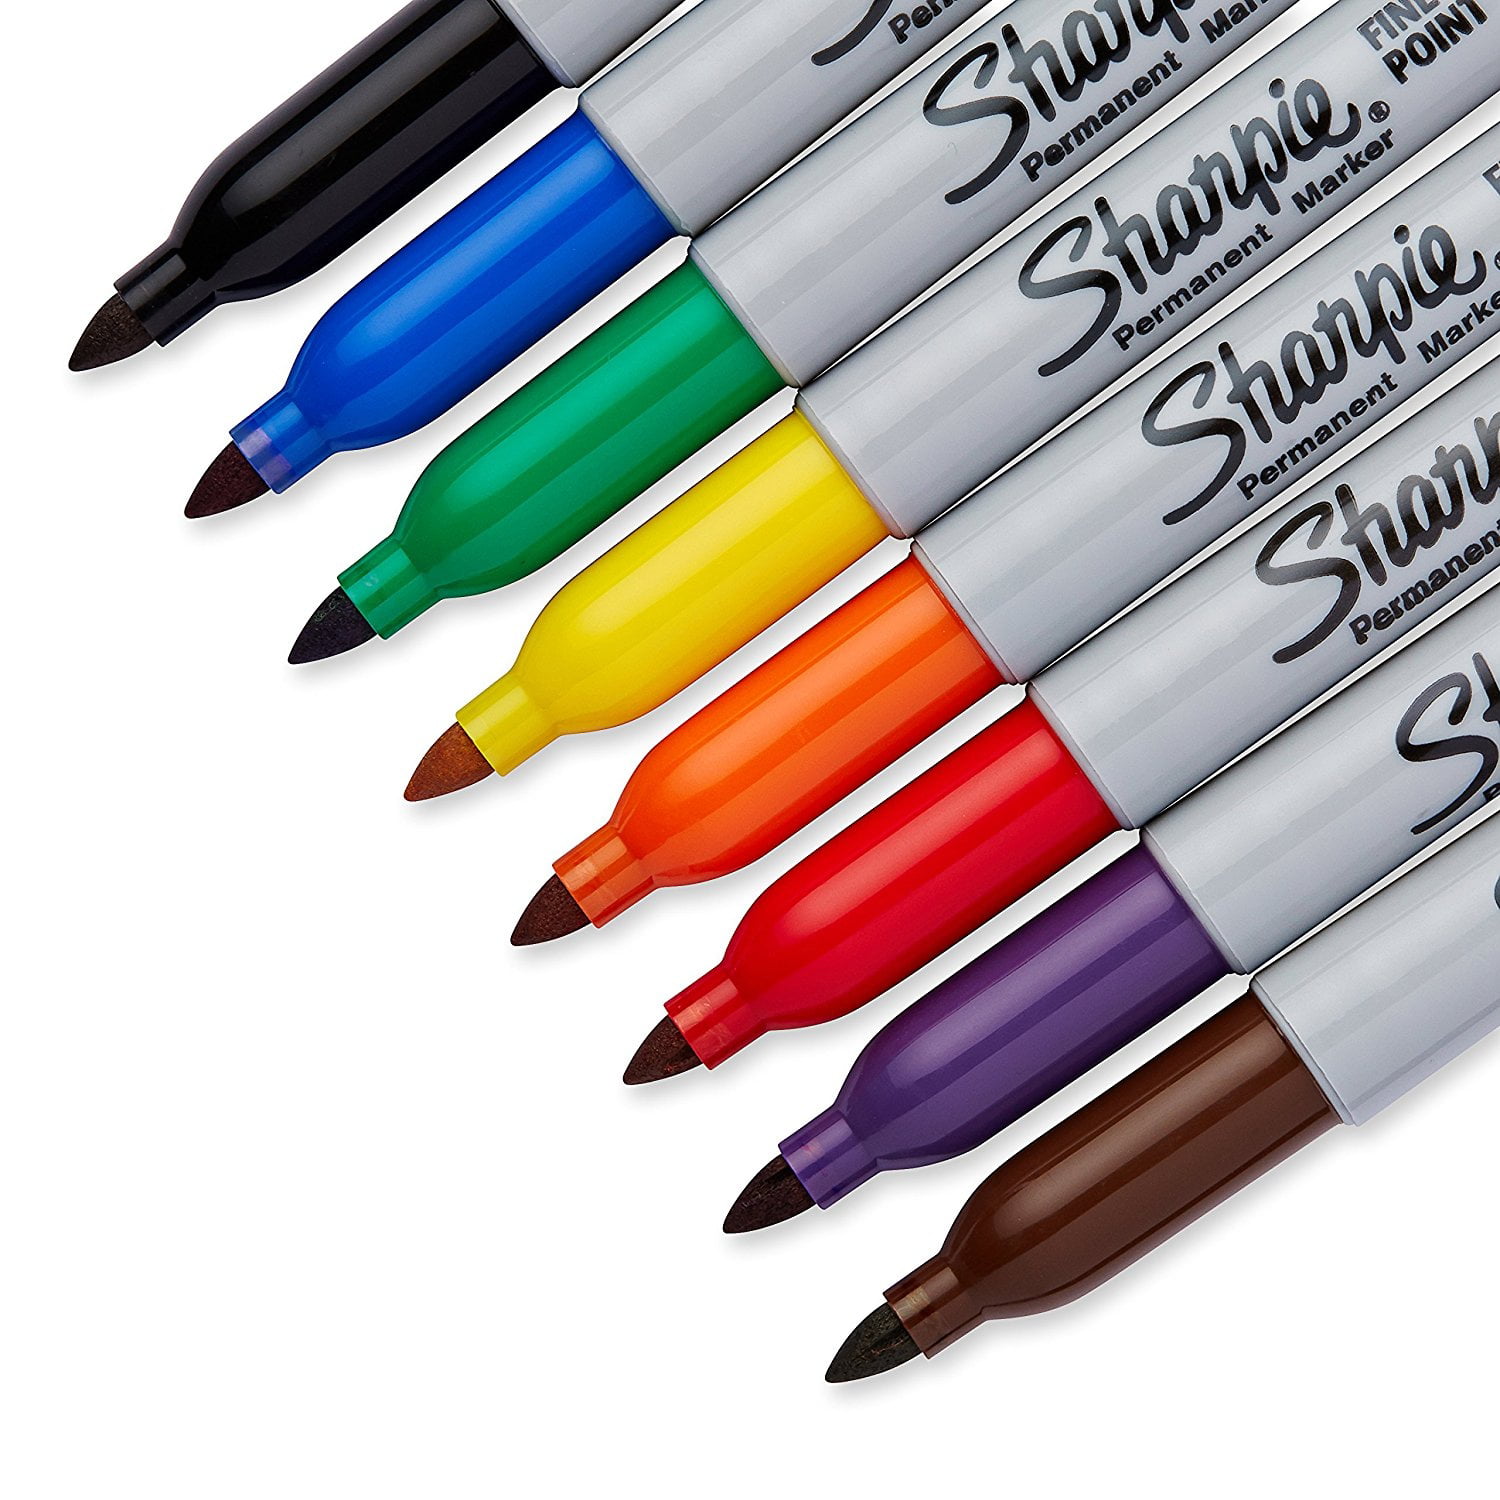 SHARPIE Ultra Fine Point Non-Toxic Permanent Marker Assorted Colors 8 ct NEW